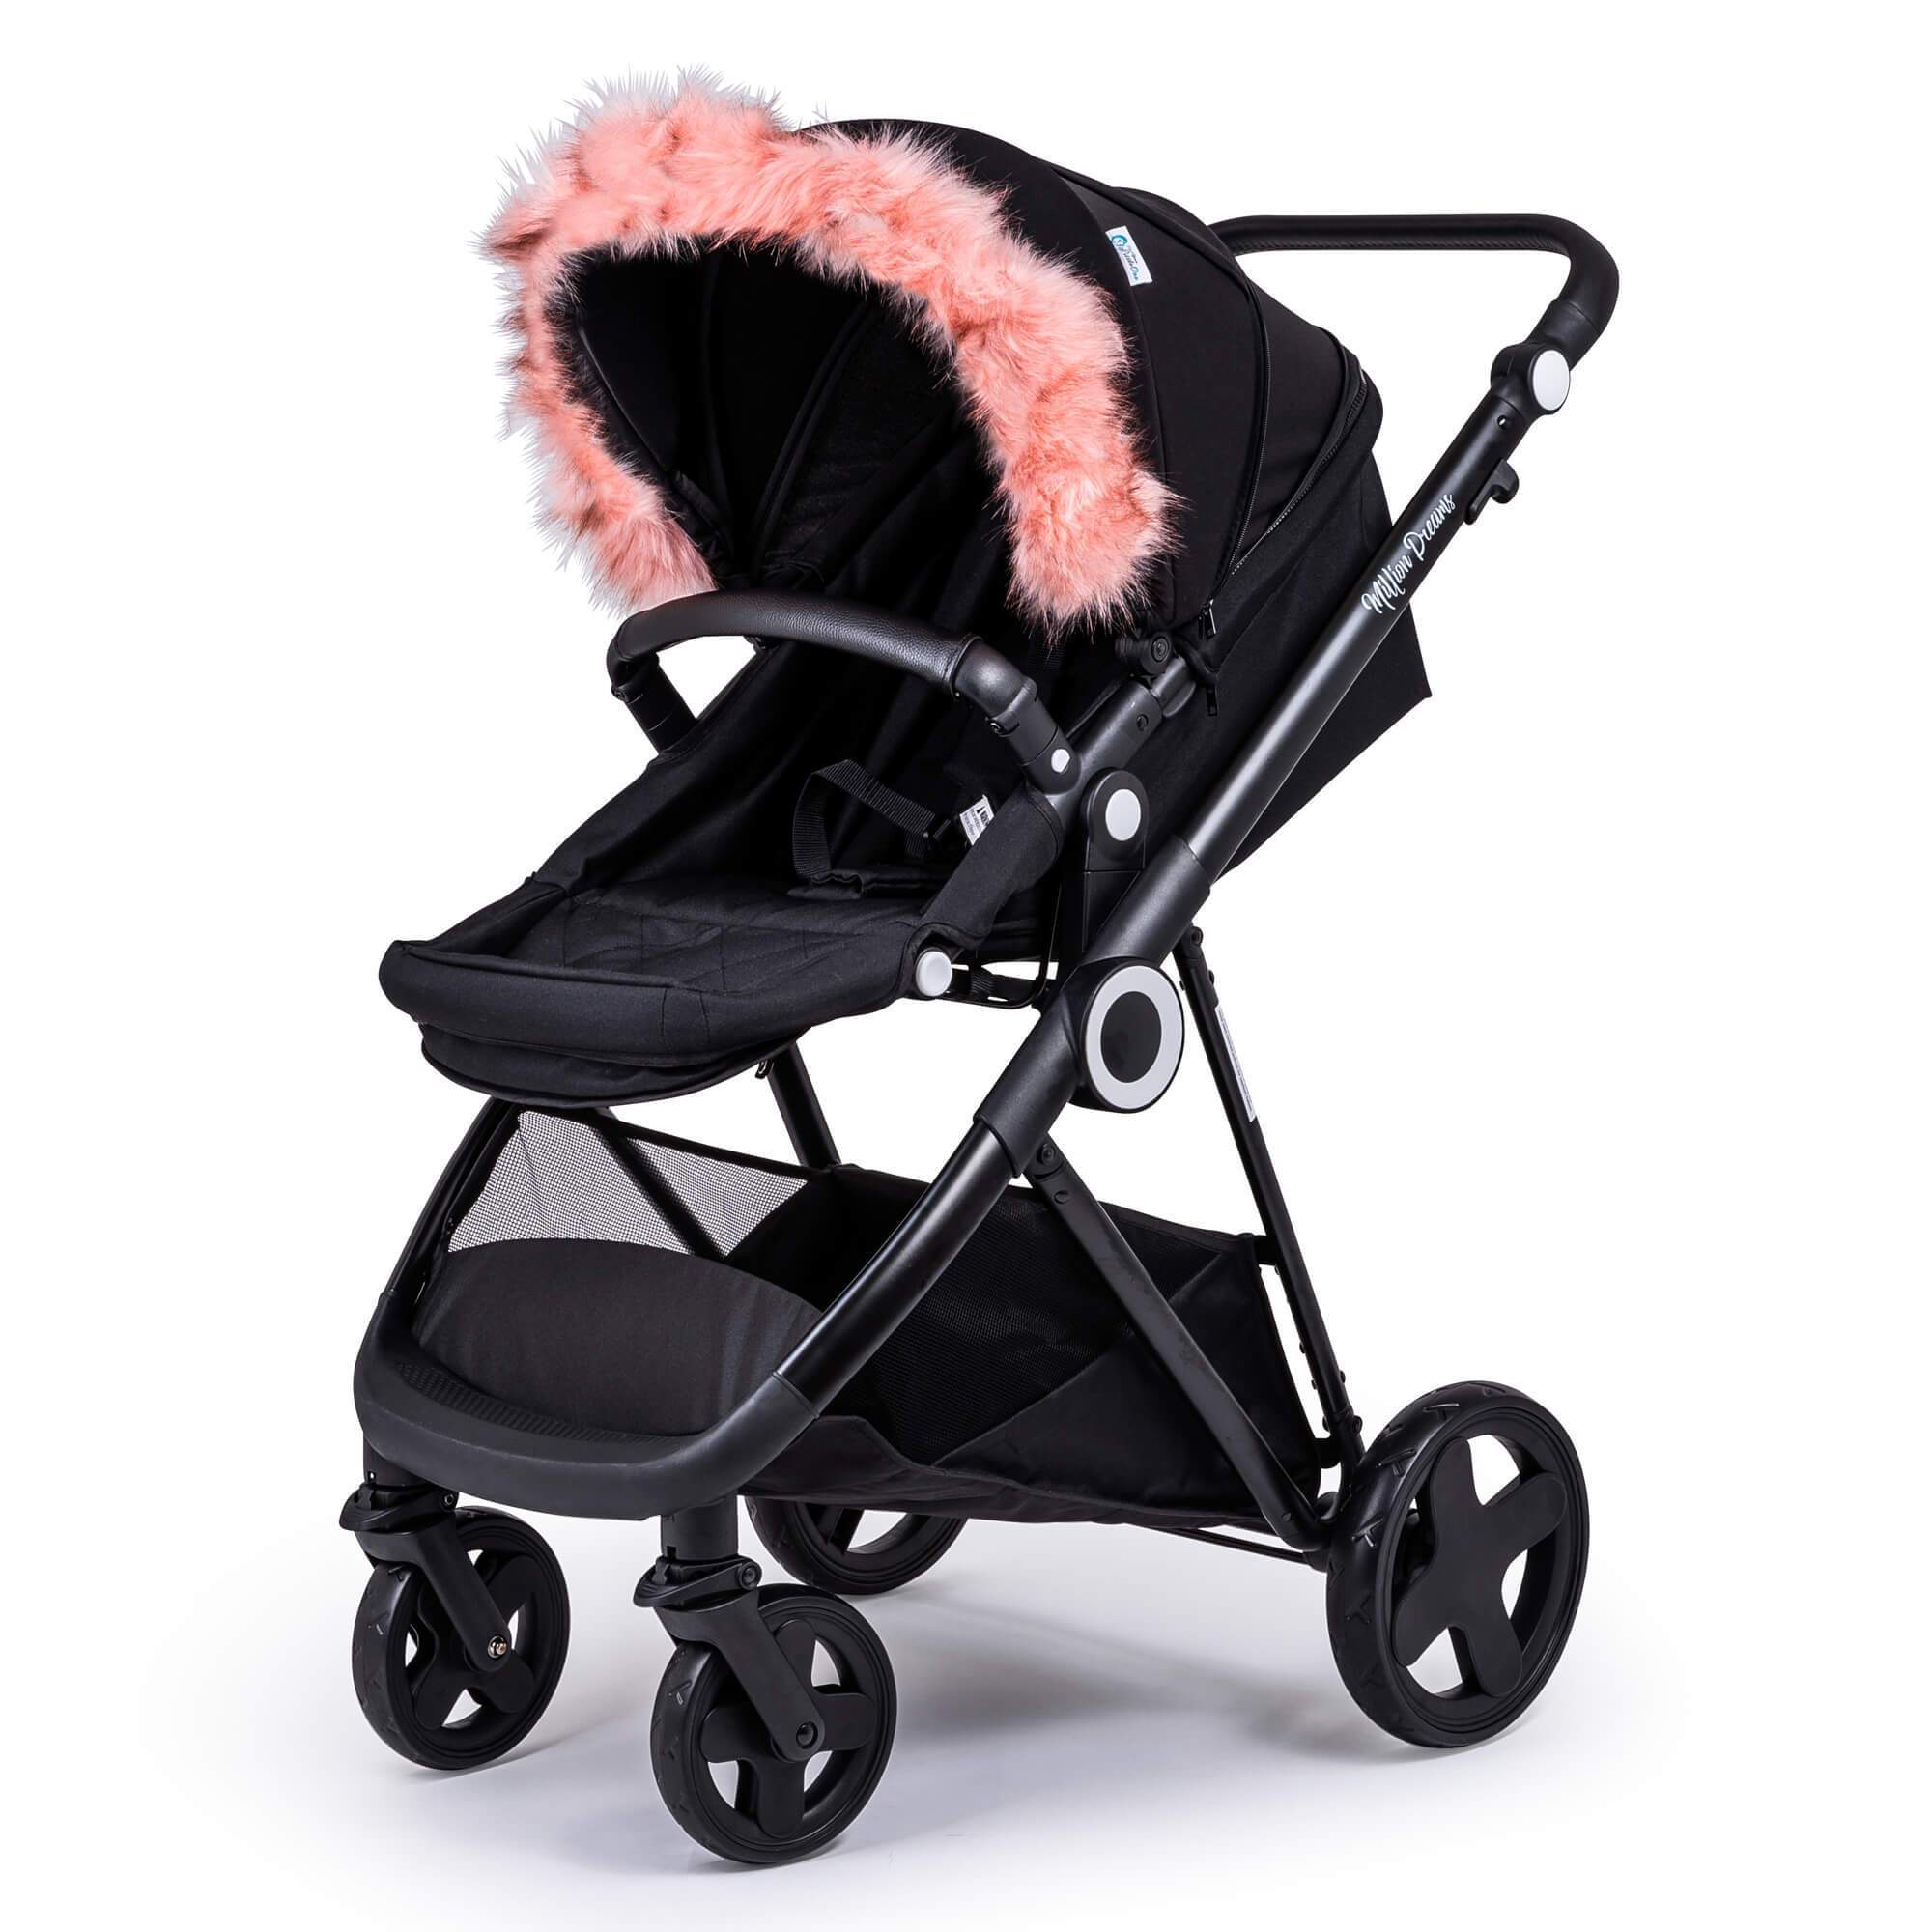 Pram Fur Hood Trim Attachment for Pushchair Compatible with Safety 1st - Pink / Fits All Models | For Your Little One